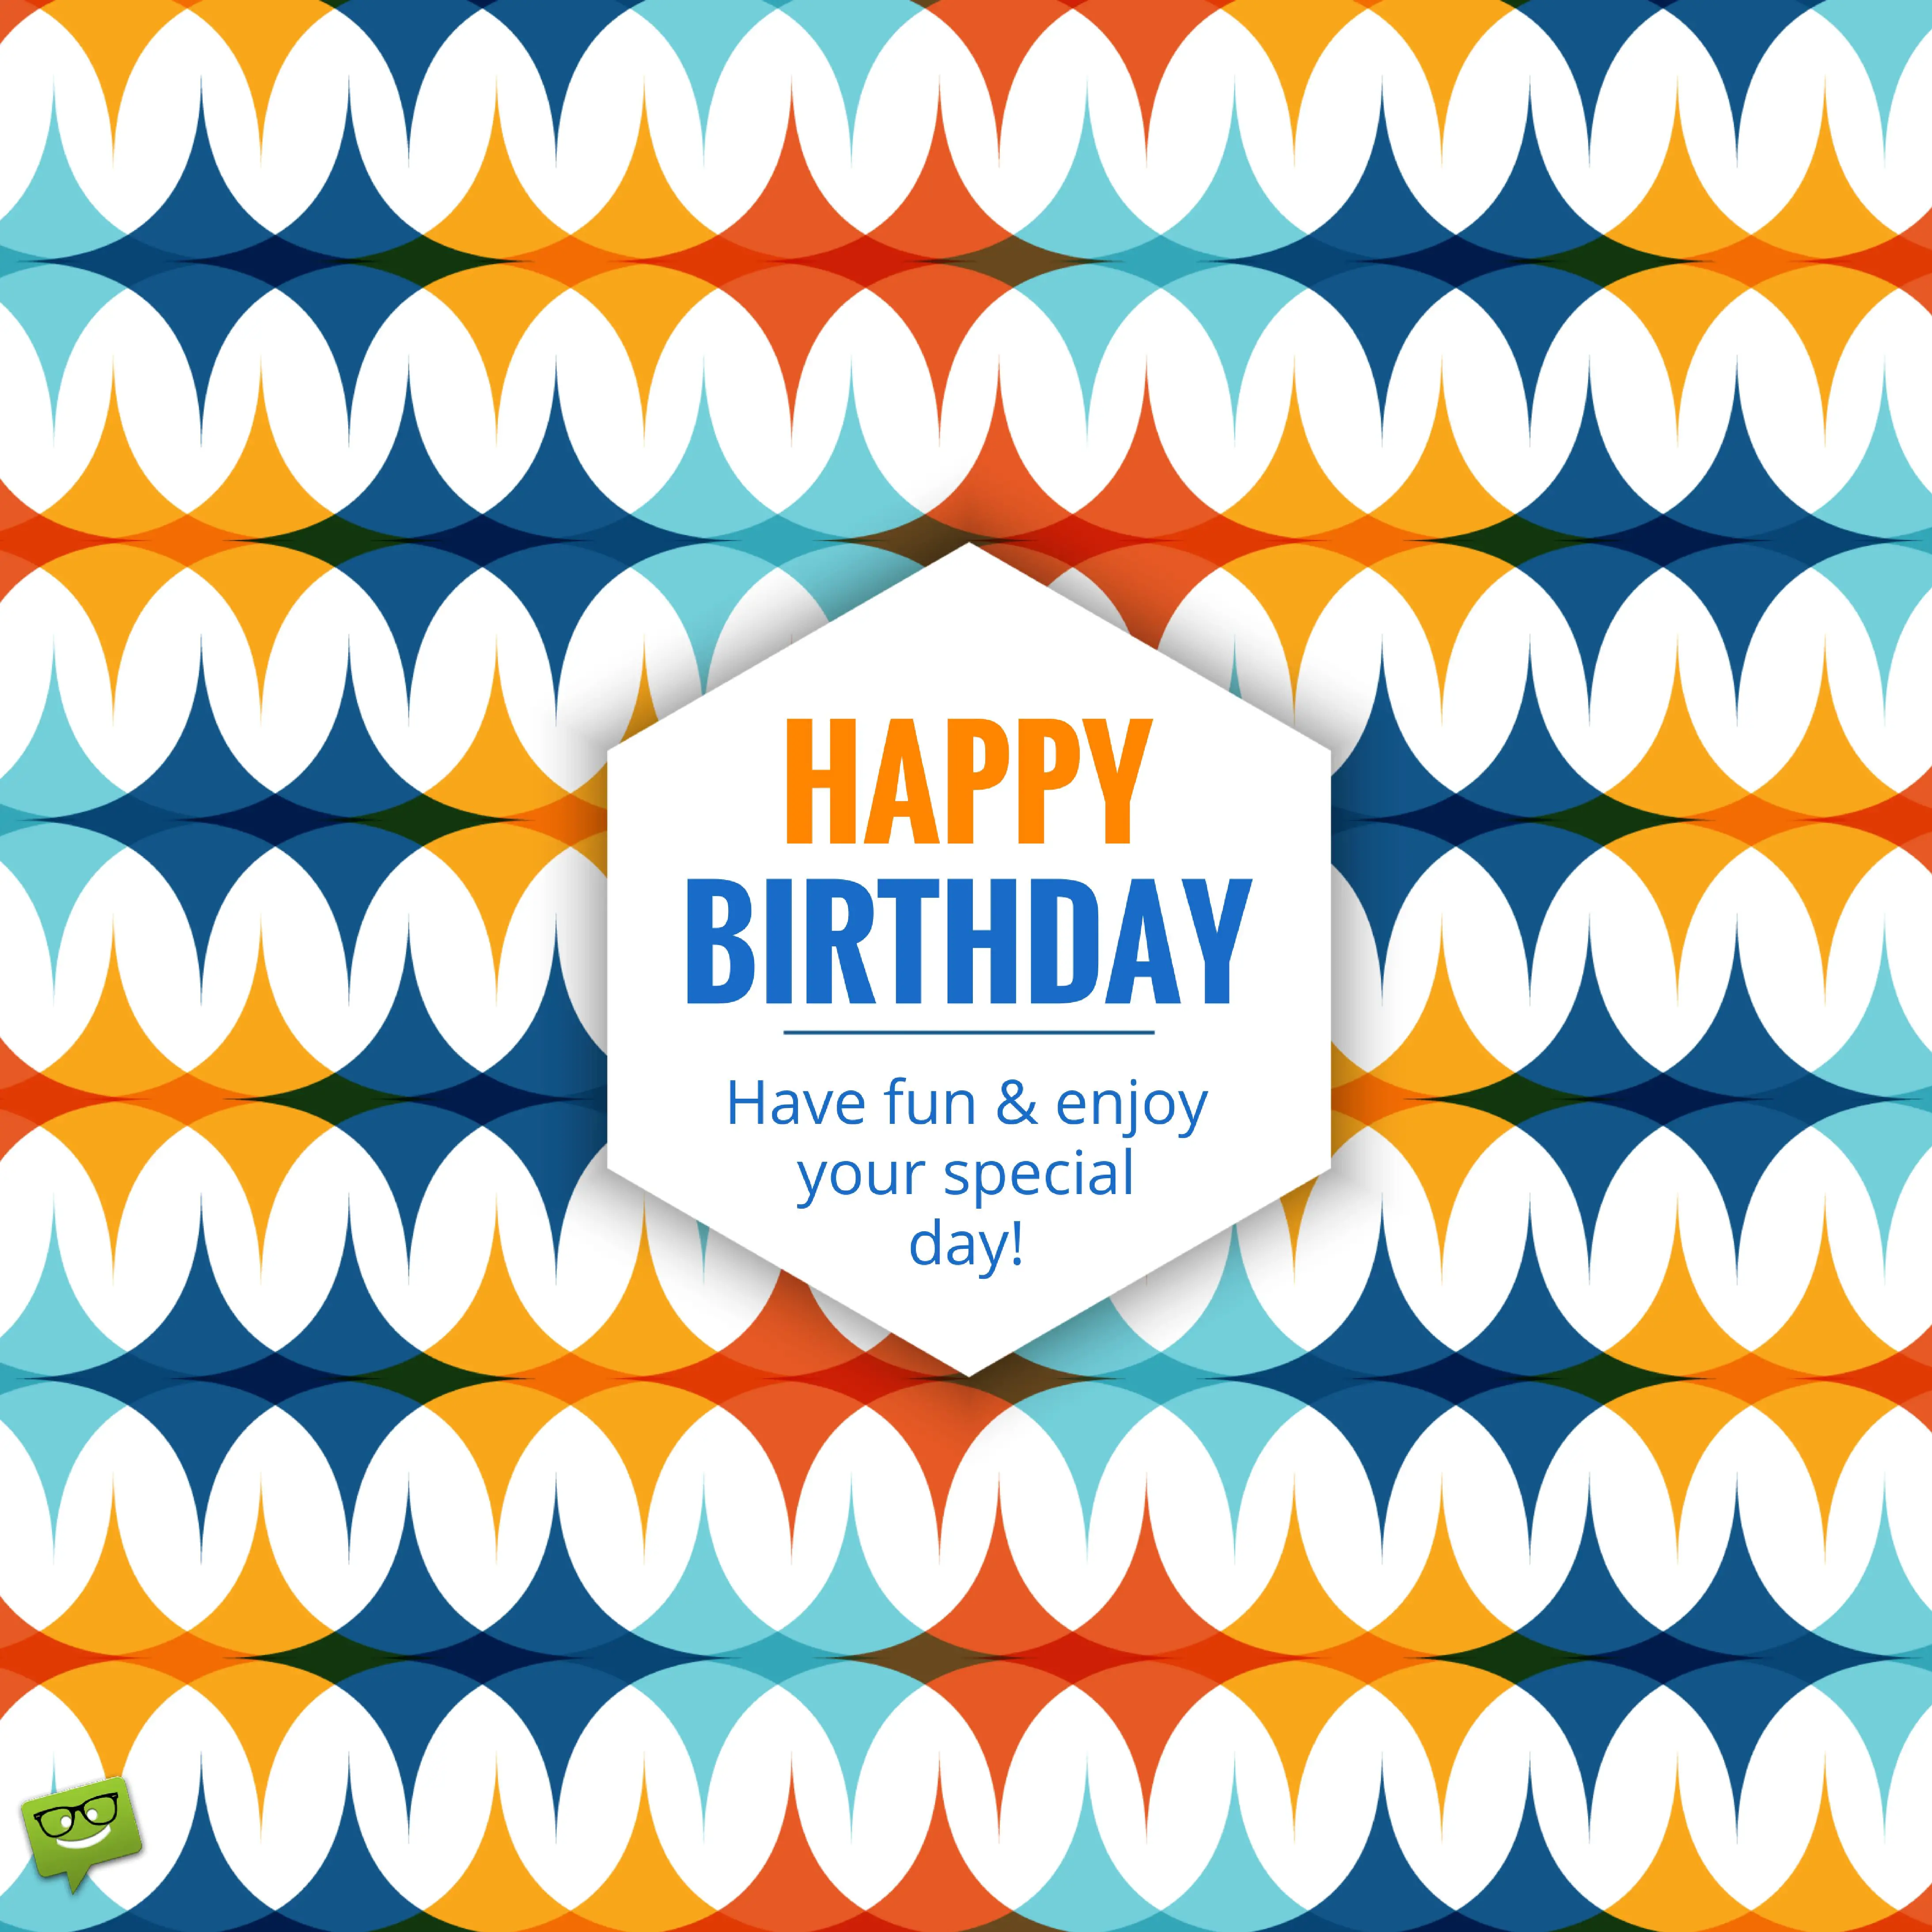 birthday-wish-on-background-with-bright-and-happy-color-pattern